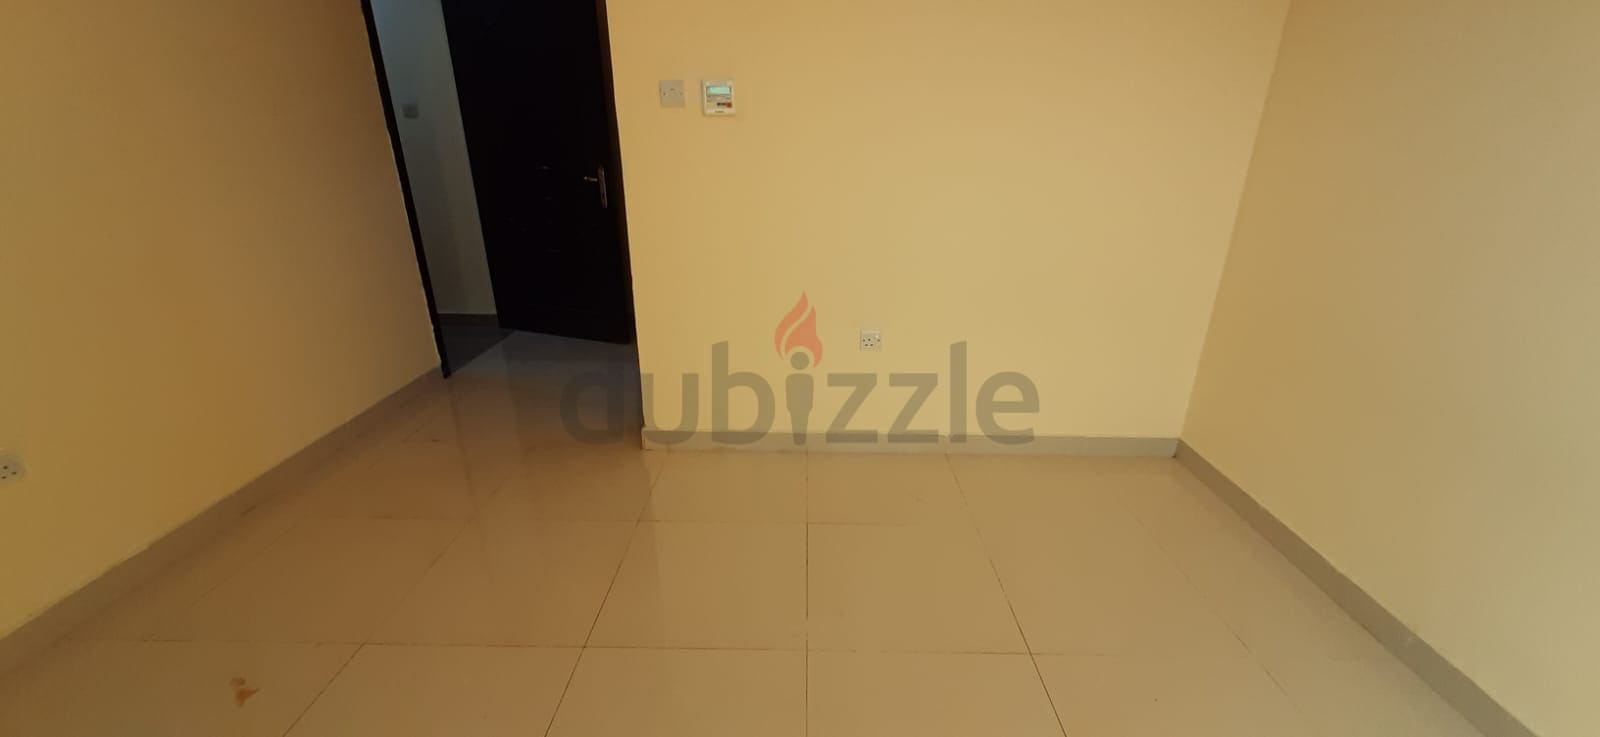 Stunning 2 Bhk Apartment - Comfortable And Convenient Living In A Prime Location In Abu Dhabi!